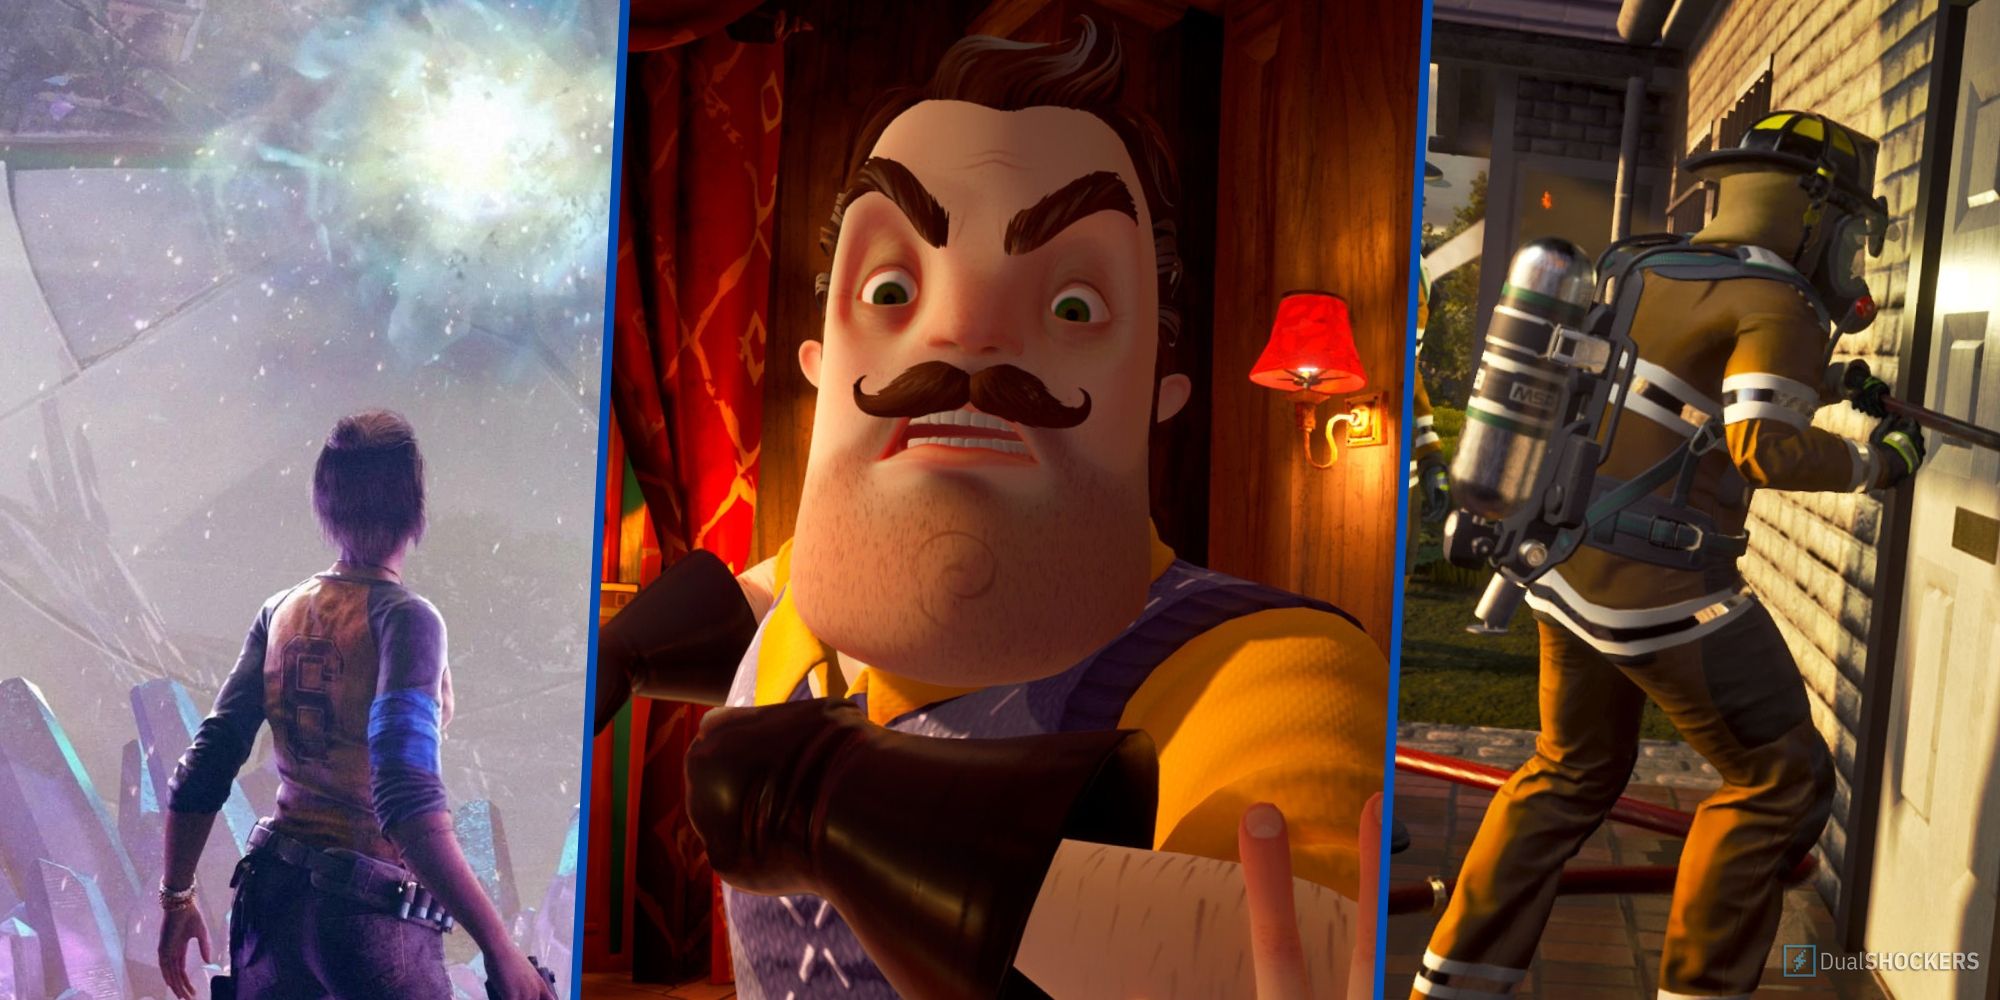 far cry 6 dlc and hello neighbor 2 lead this week's new ps5 and ps4 games on the playstation store